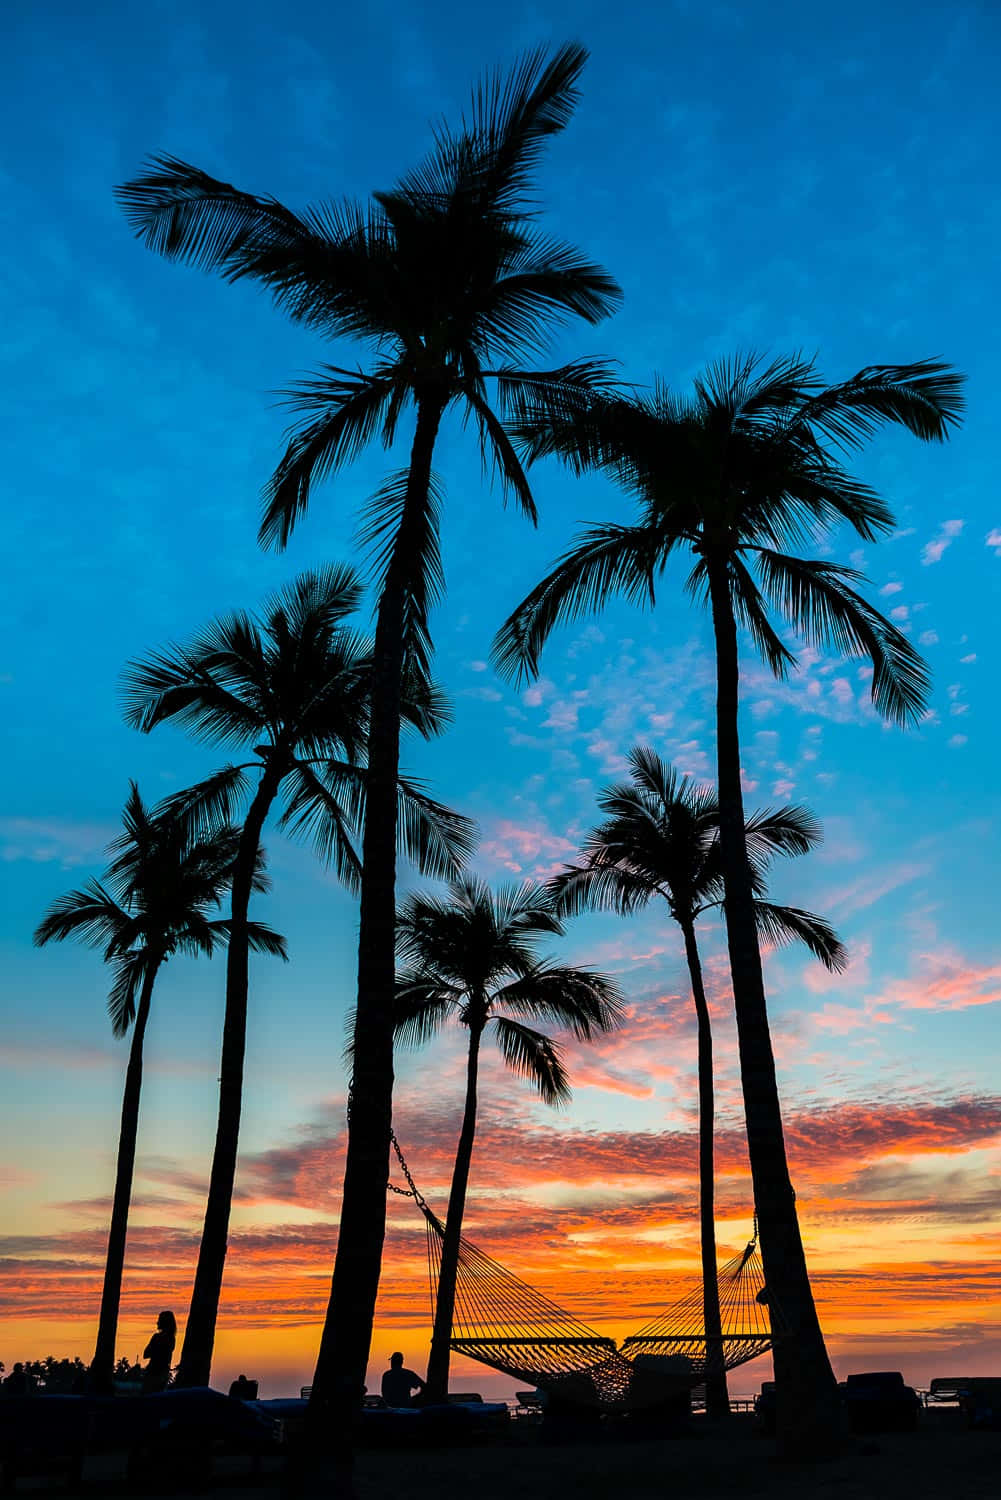 Hawaiian Blue And Orange Sunset With Palm Trees Pictures